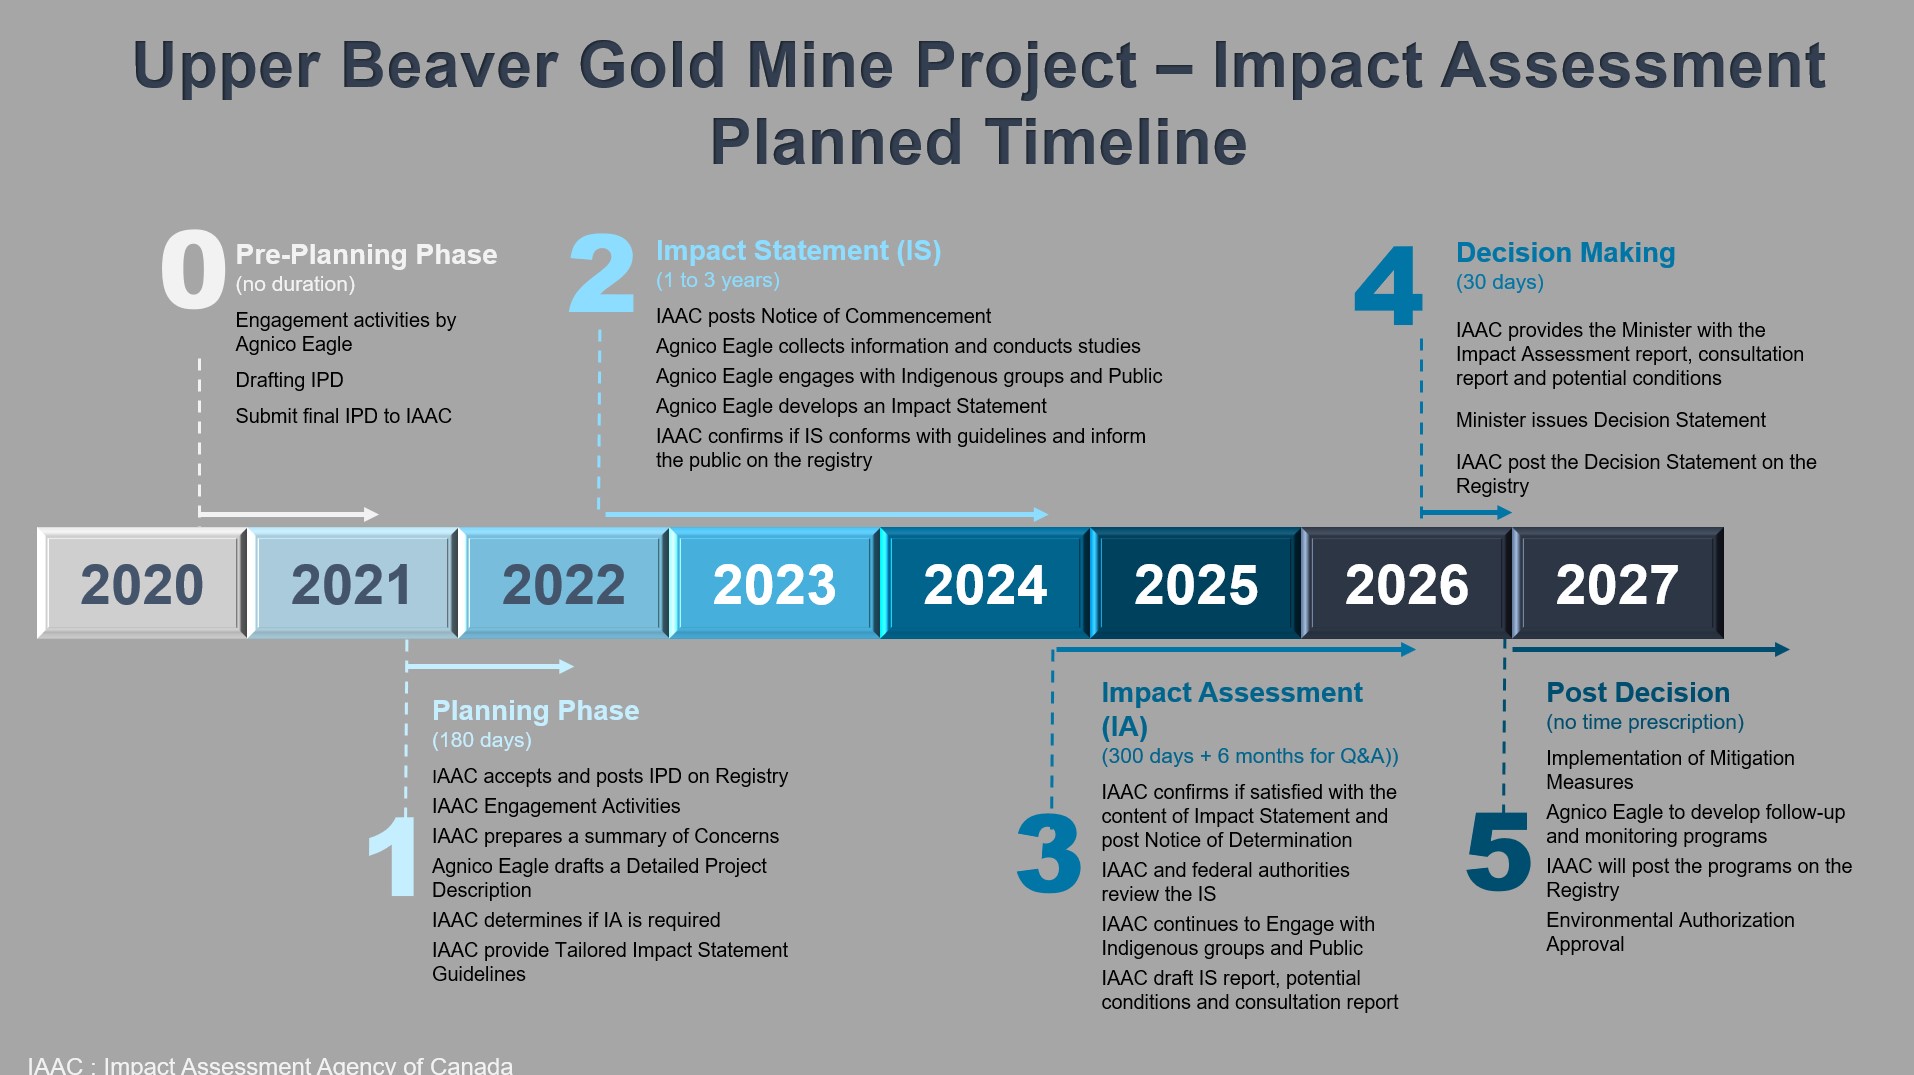 Upper Beaver Gold Mine Project - Impact Assessment Planned Timeline